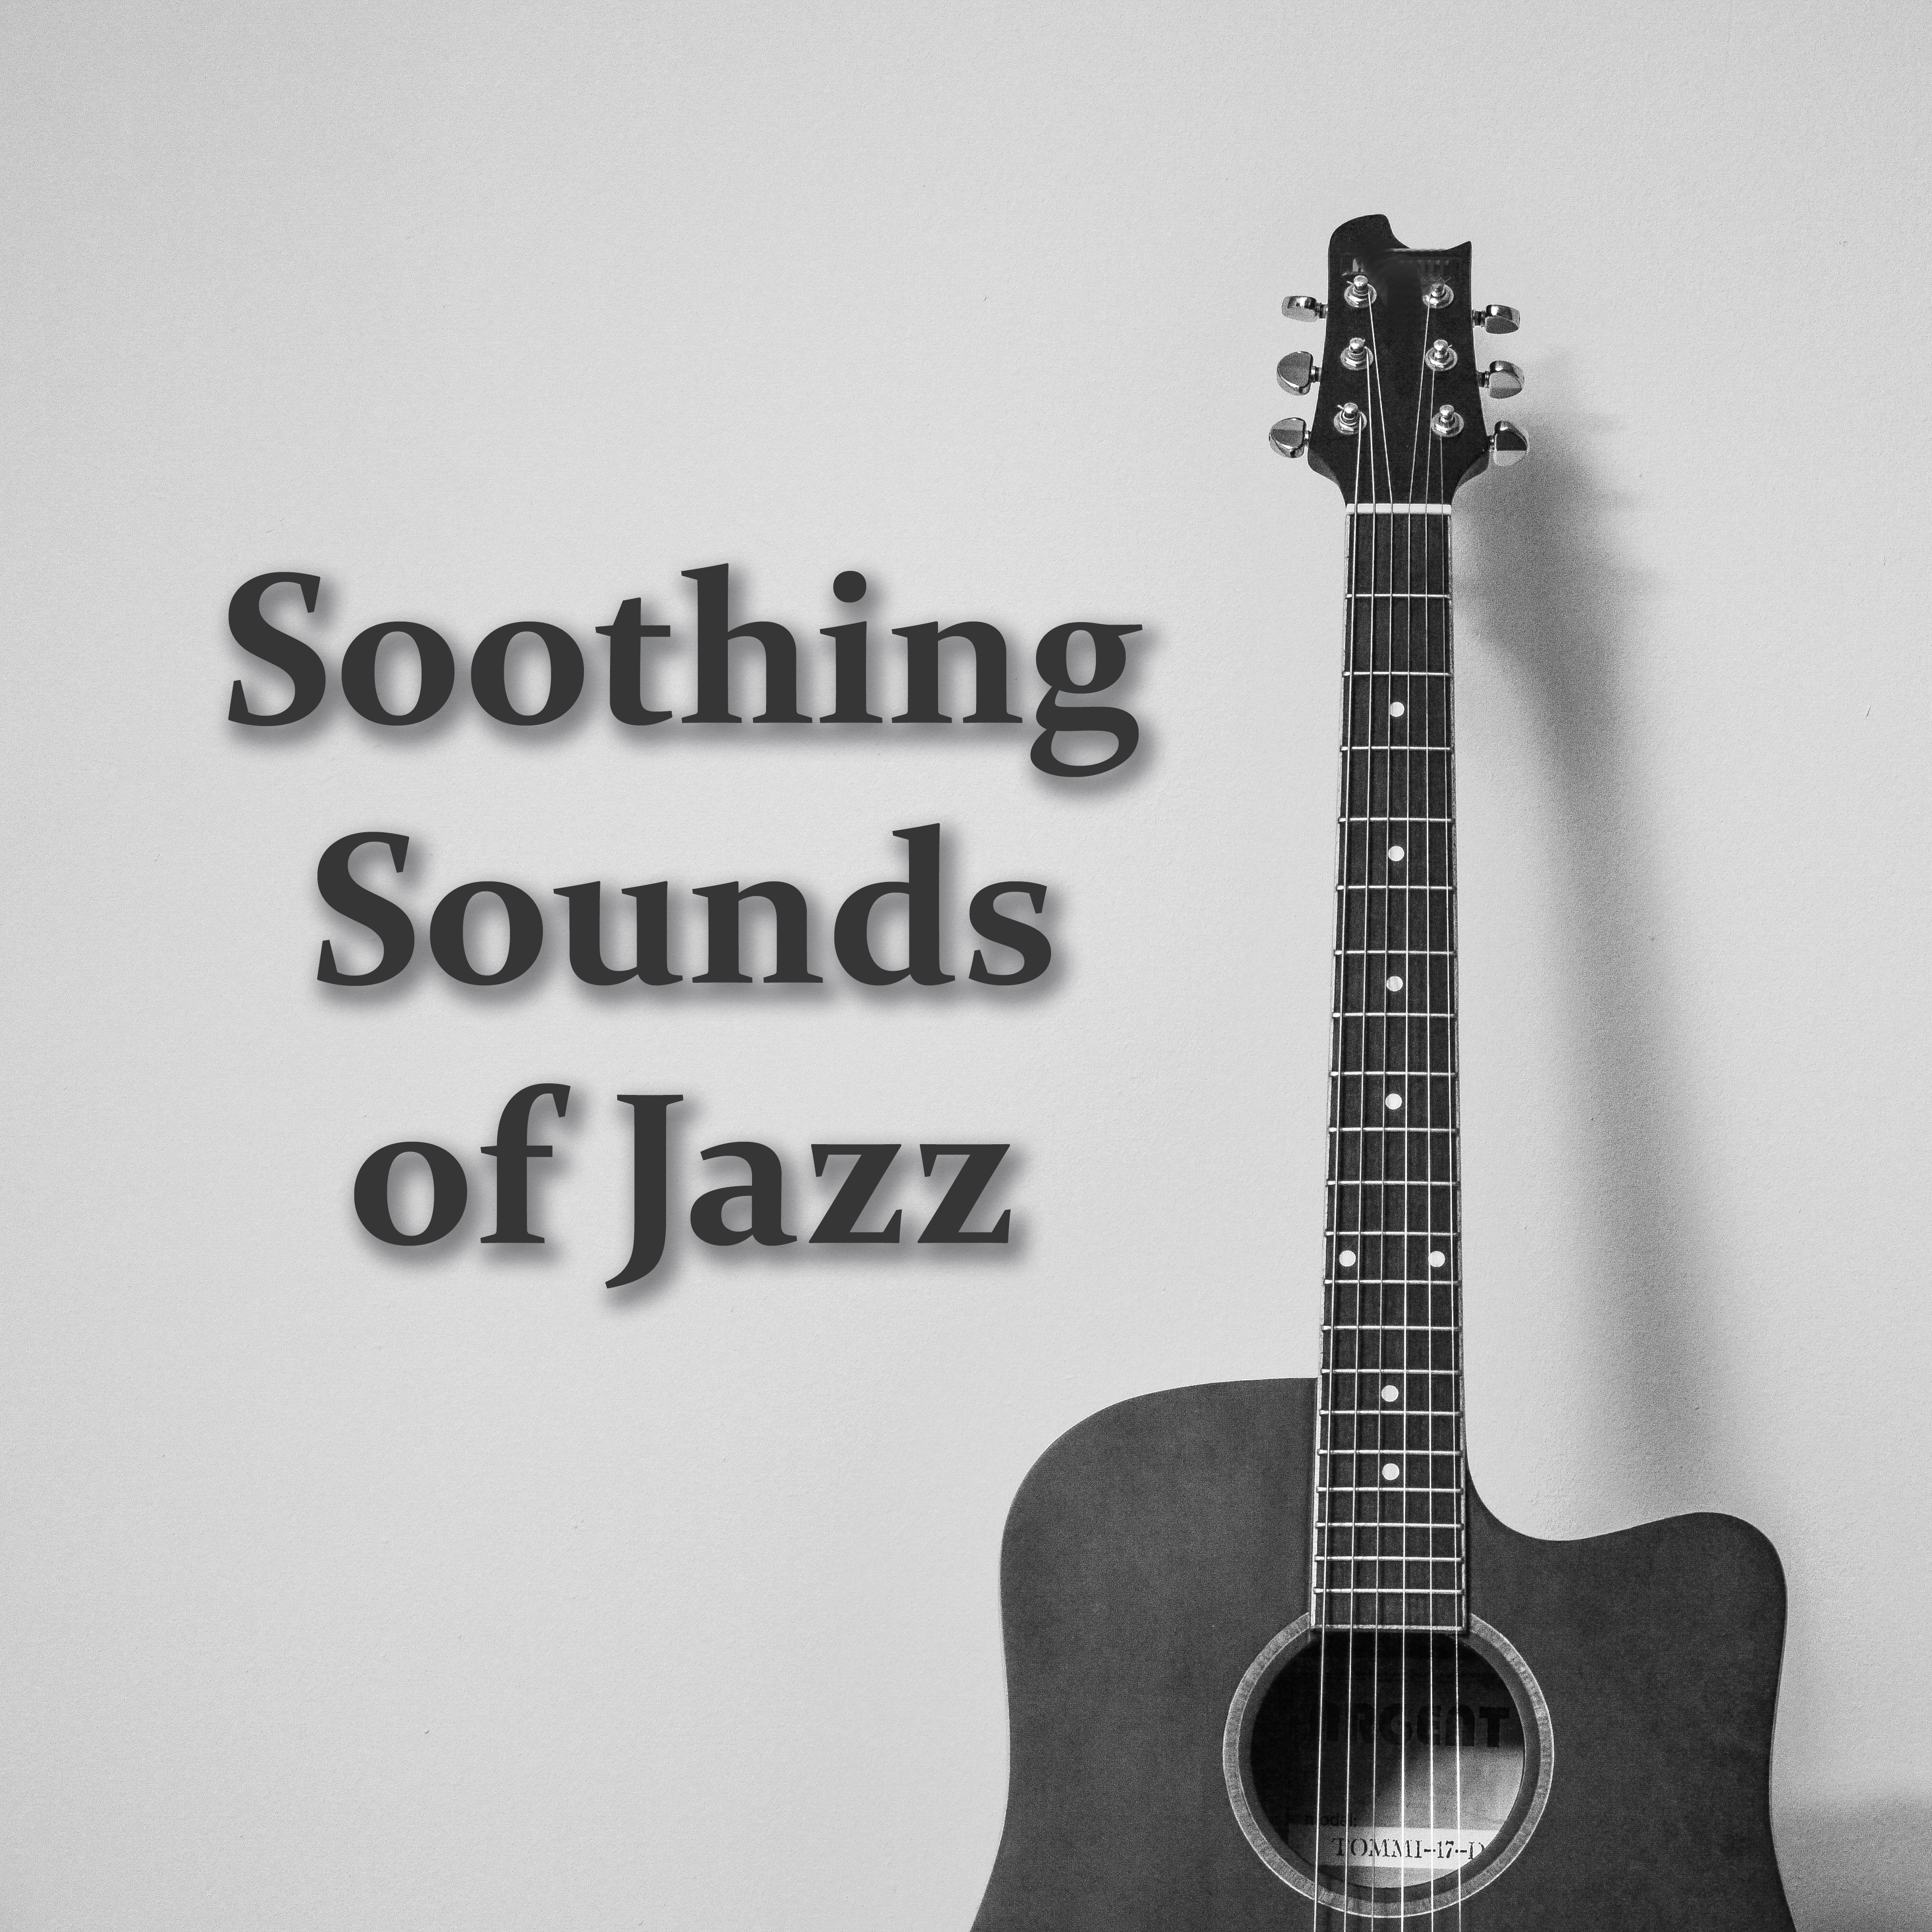 Soothing Sounds of Jazz  Instrumental Music for Sleep, Bedtime, Healing Lullabies at Goodnight, Relax, Restful Sleep, Soothing Jazz